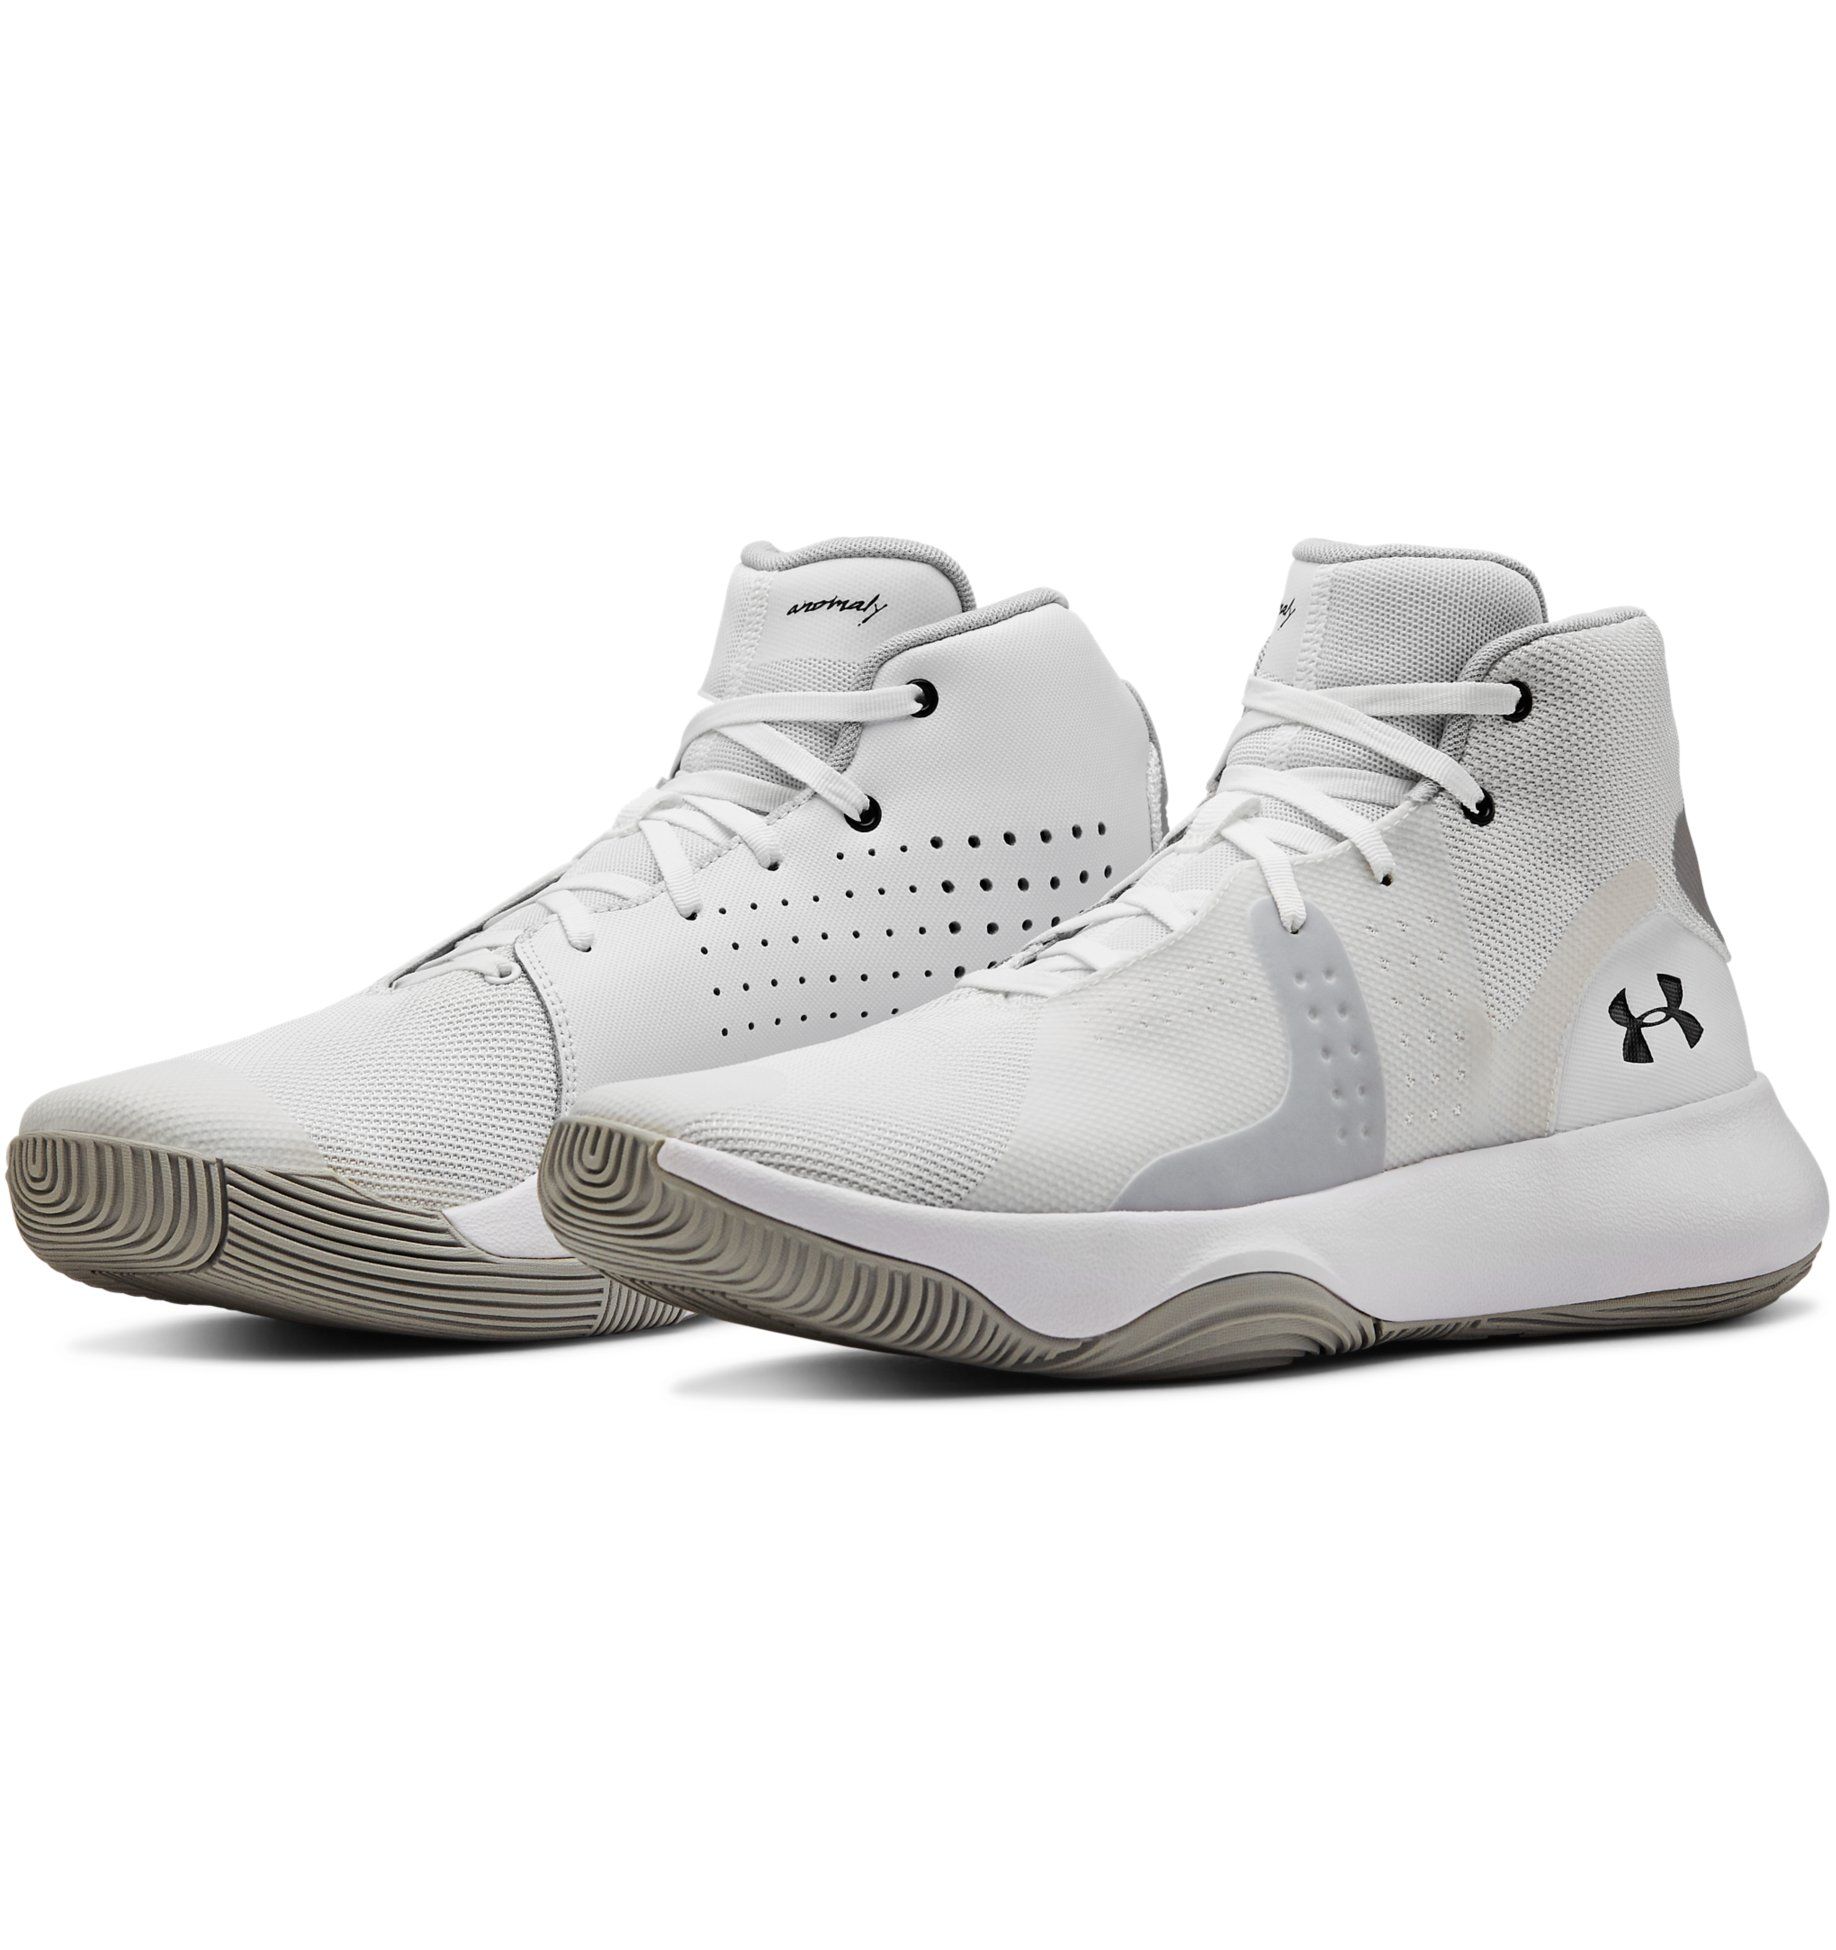 basketball shoes under 120